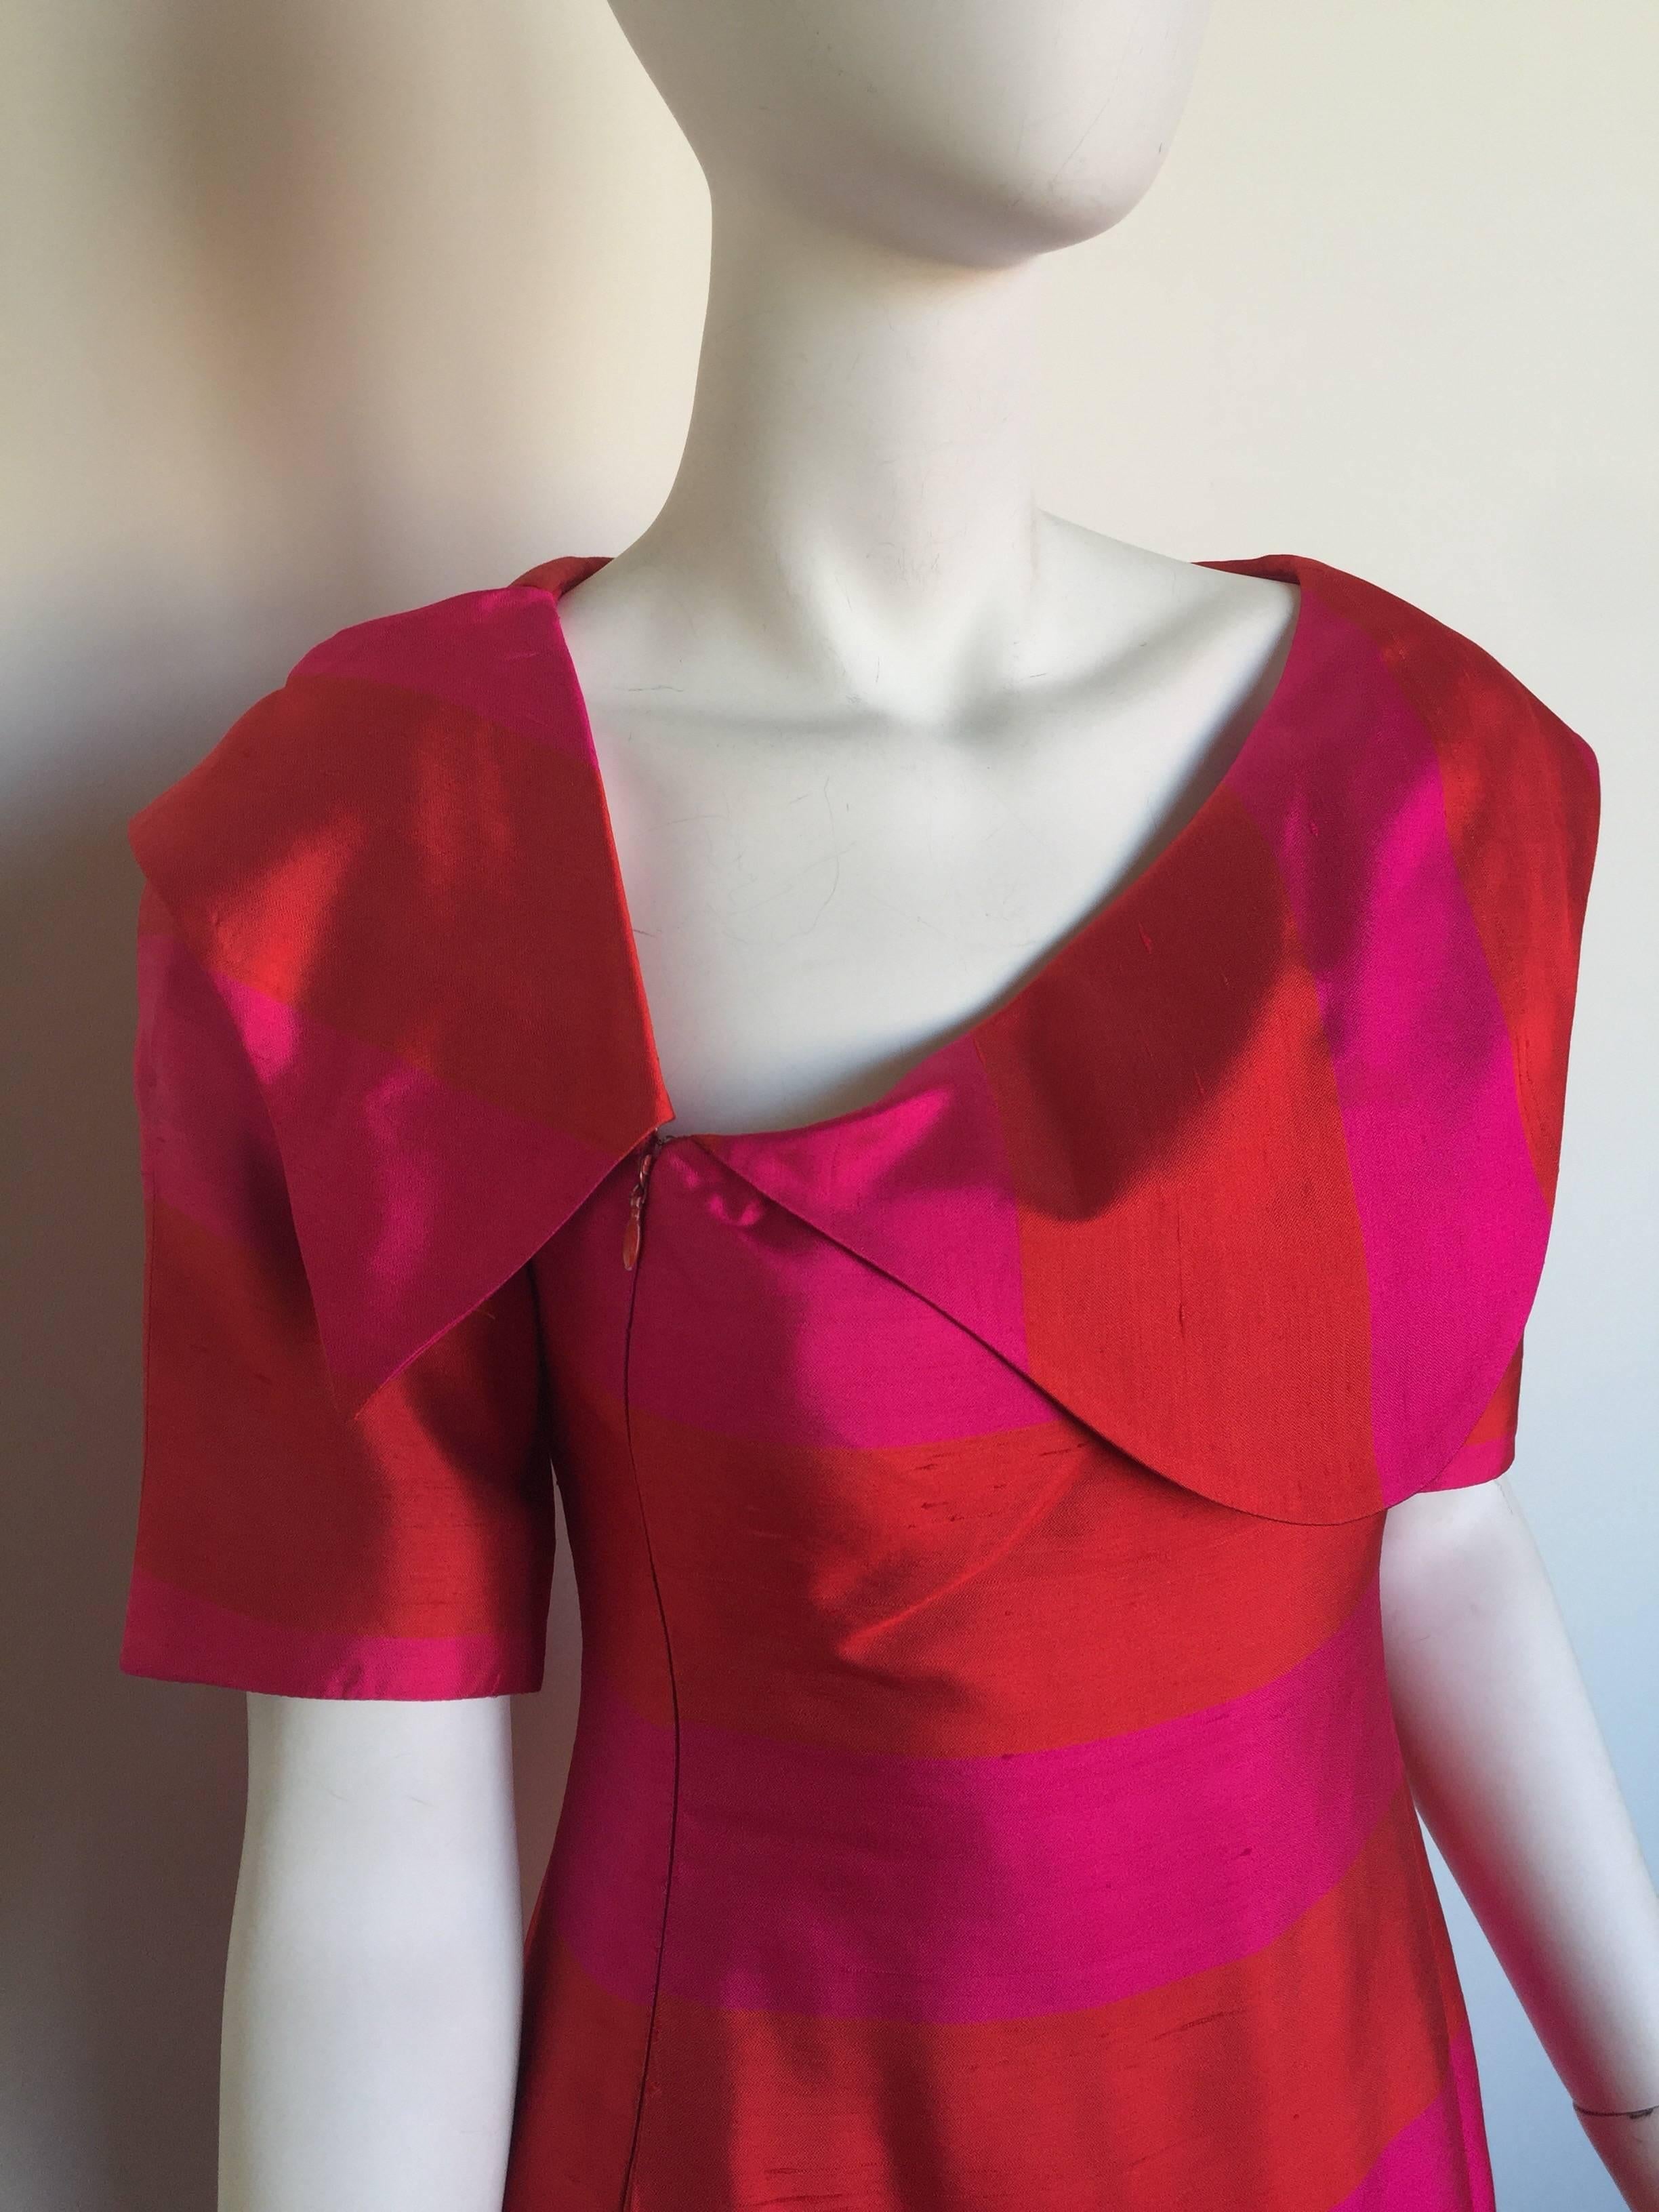 This Lanvin dress is from the 1960s.  This short sleeved dress has bright red and pink horizontal stripes. It has an asymmetrical peter pan collar and a front hidden zipper enclosure. There is a single front pocket. 

BUST: 32"
WAIST: